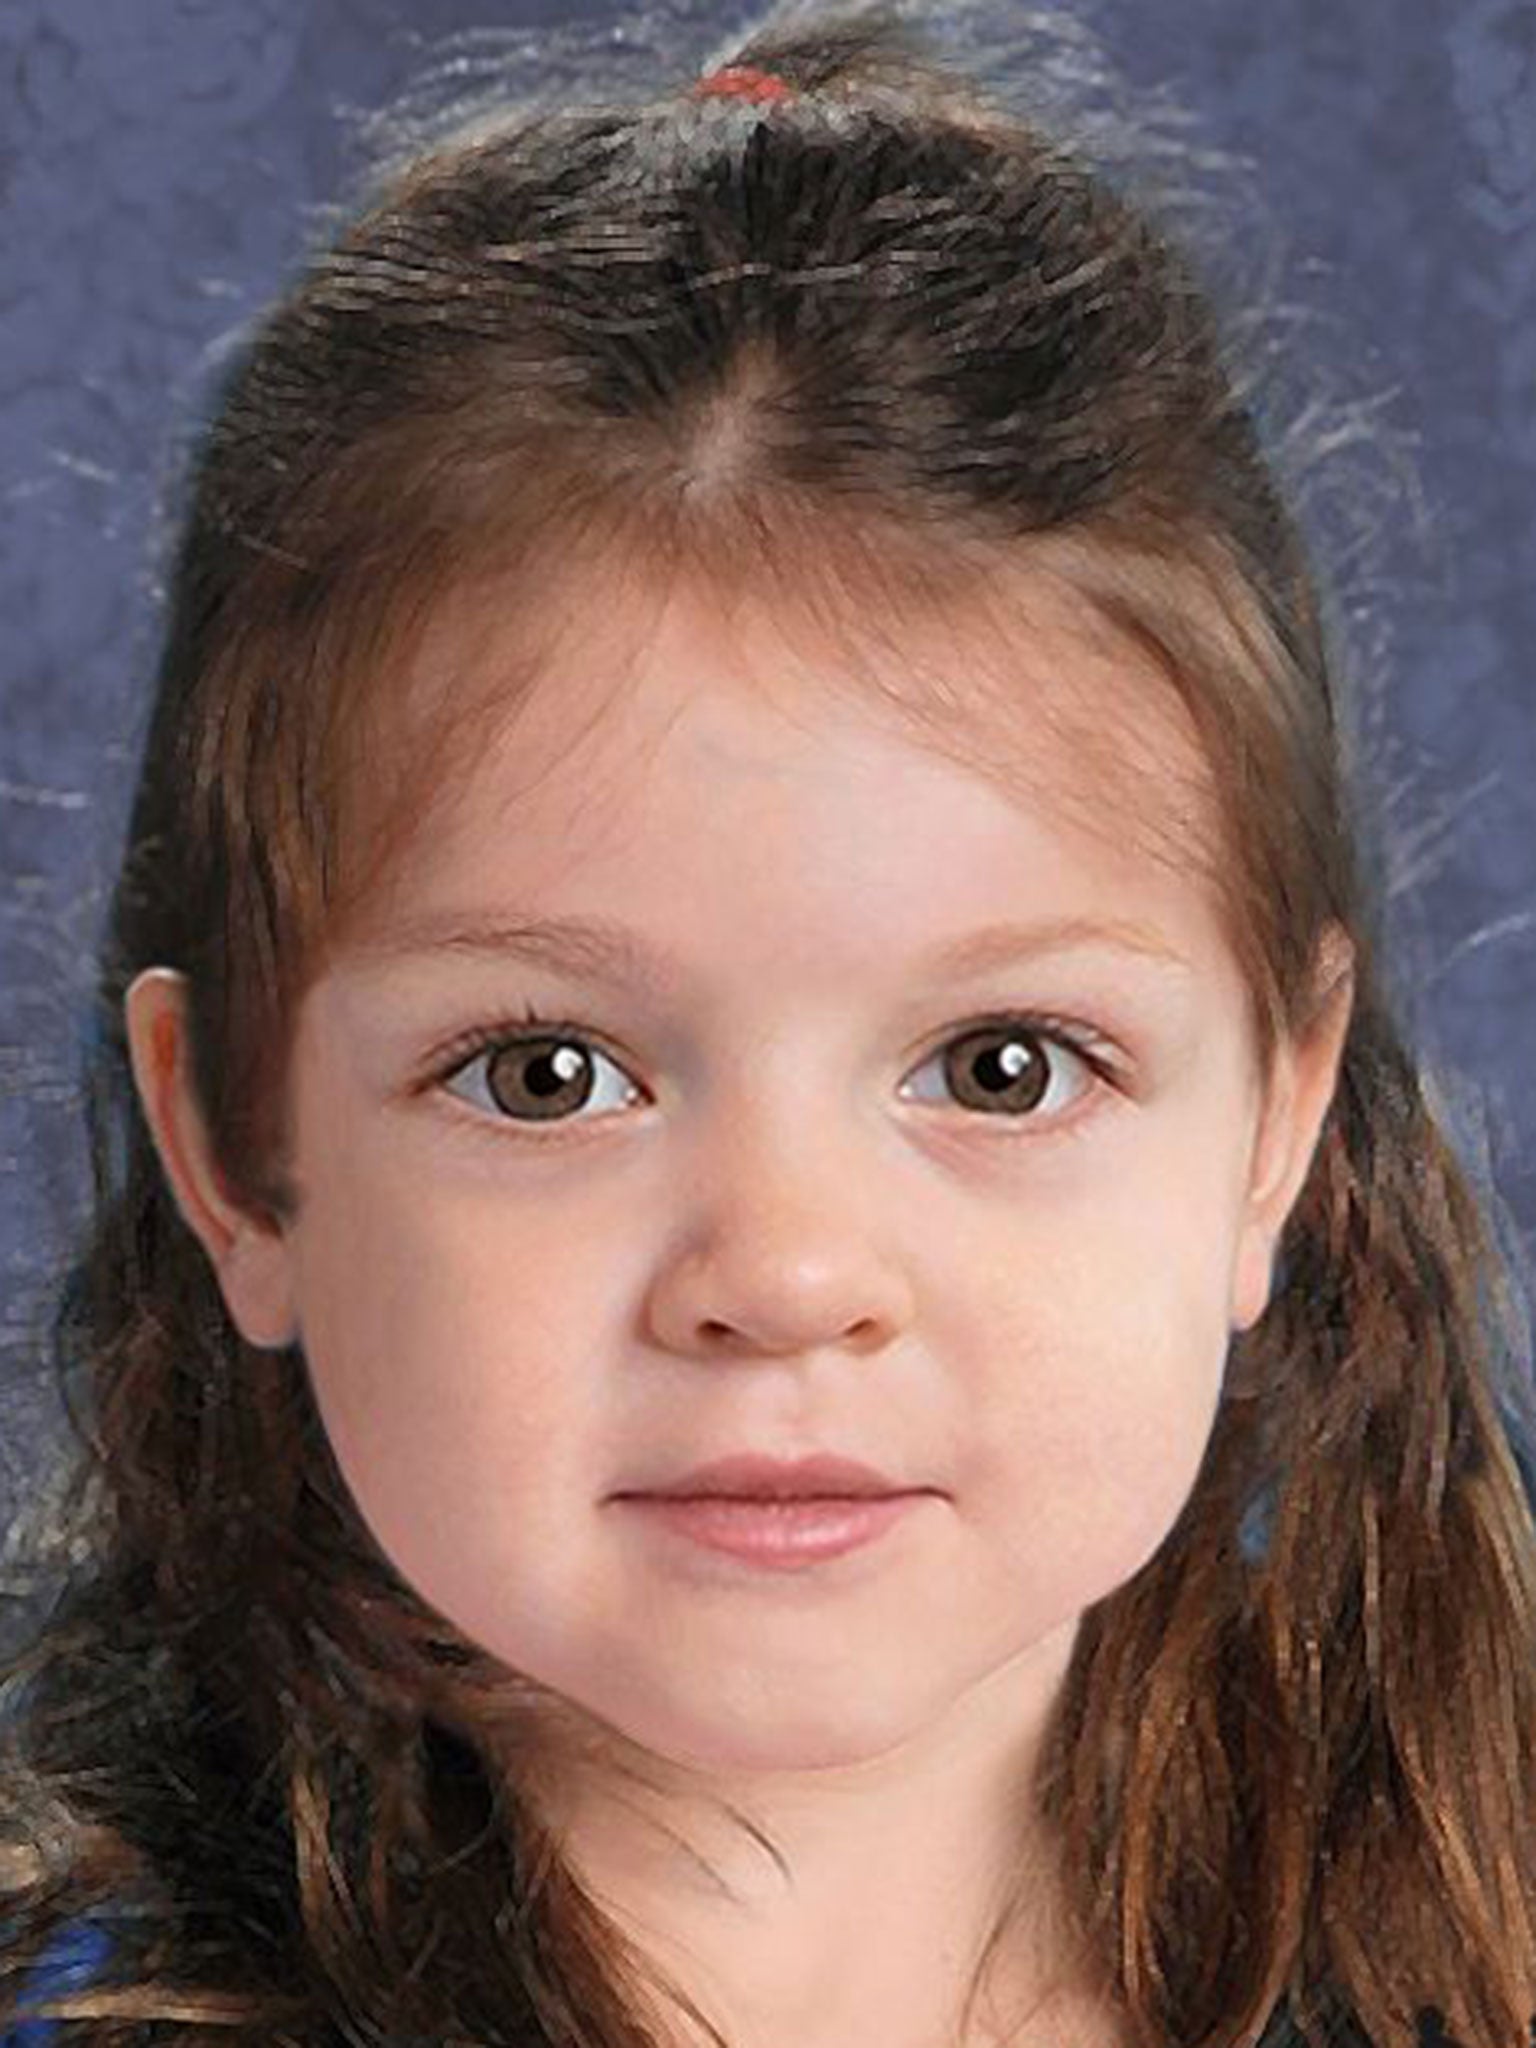 A CGI image released by Massachusetts Police of a little girl whose body was found on Boston Harbour